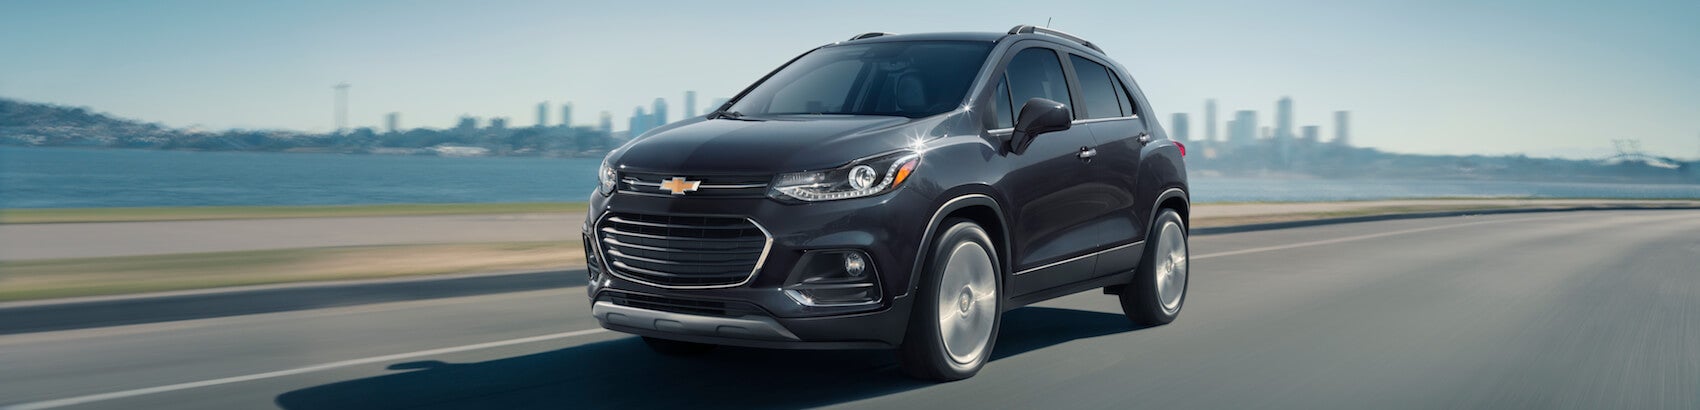 Test drive a Chevy Trax Howell, MI